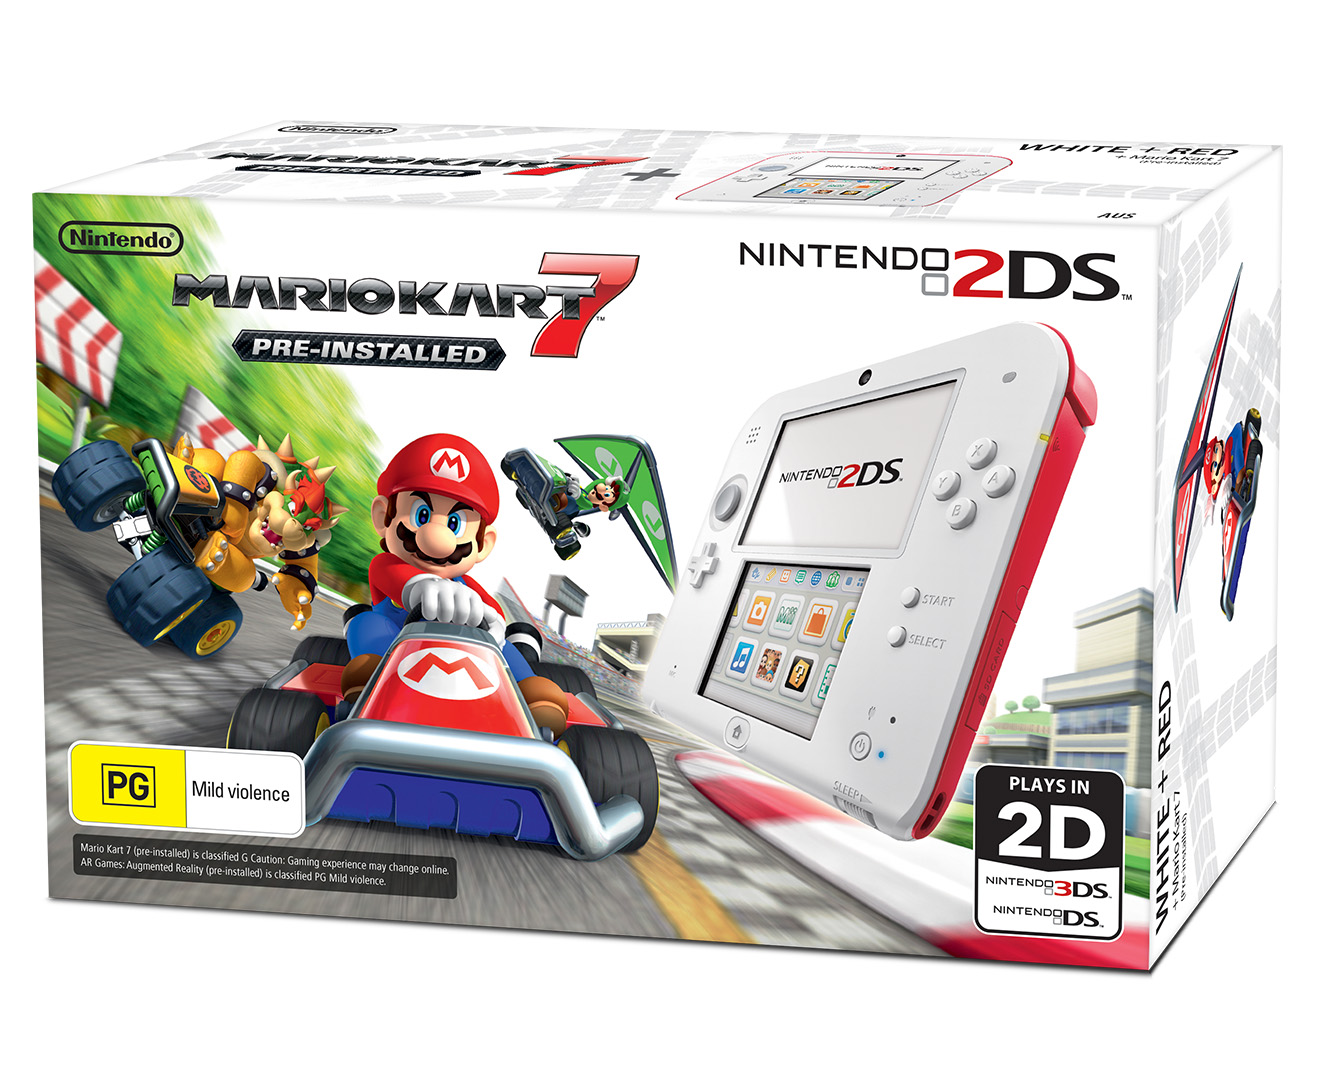 Nintendo 2ds Game Console Mario Kart 7 Pre Installed White Red Great Daily Deals At